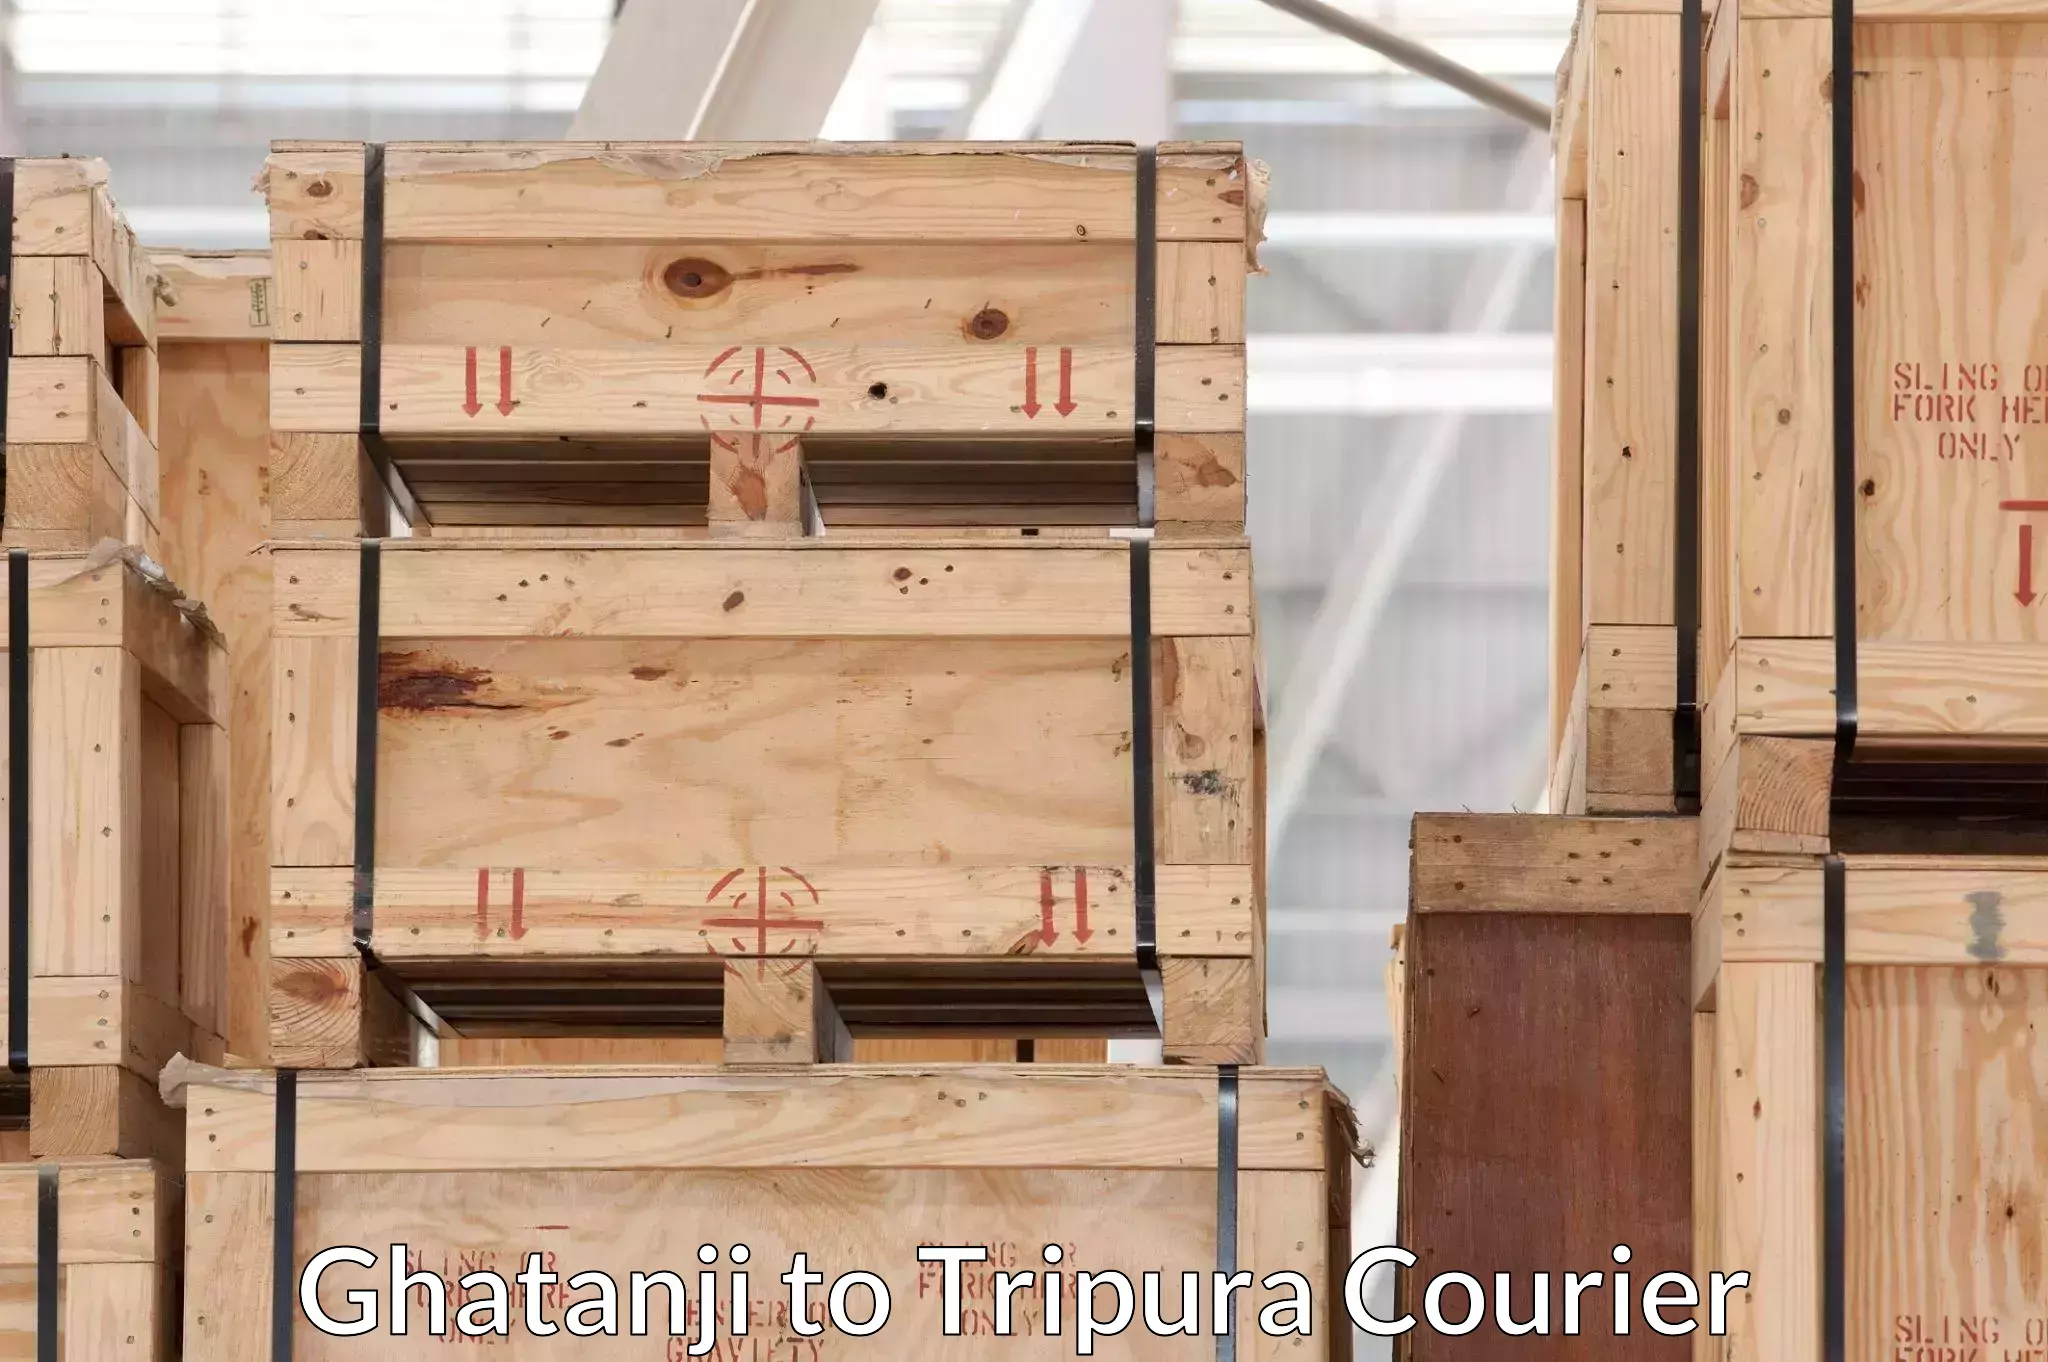 Cost-effective moving options Ghatanji to Udaipur Tripura